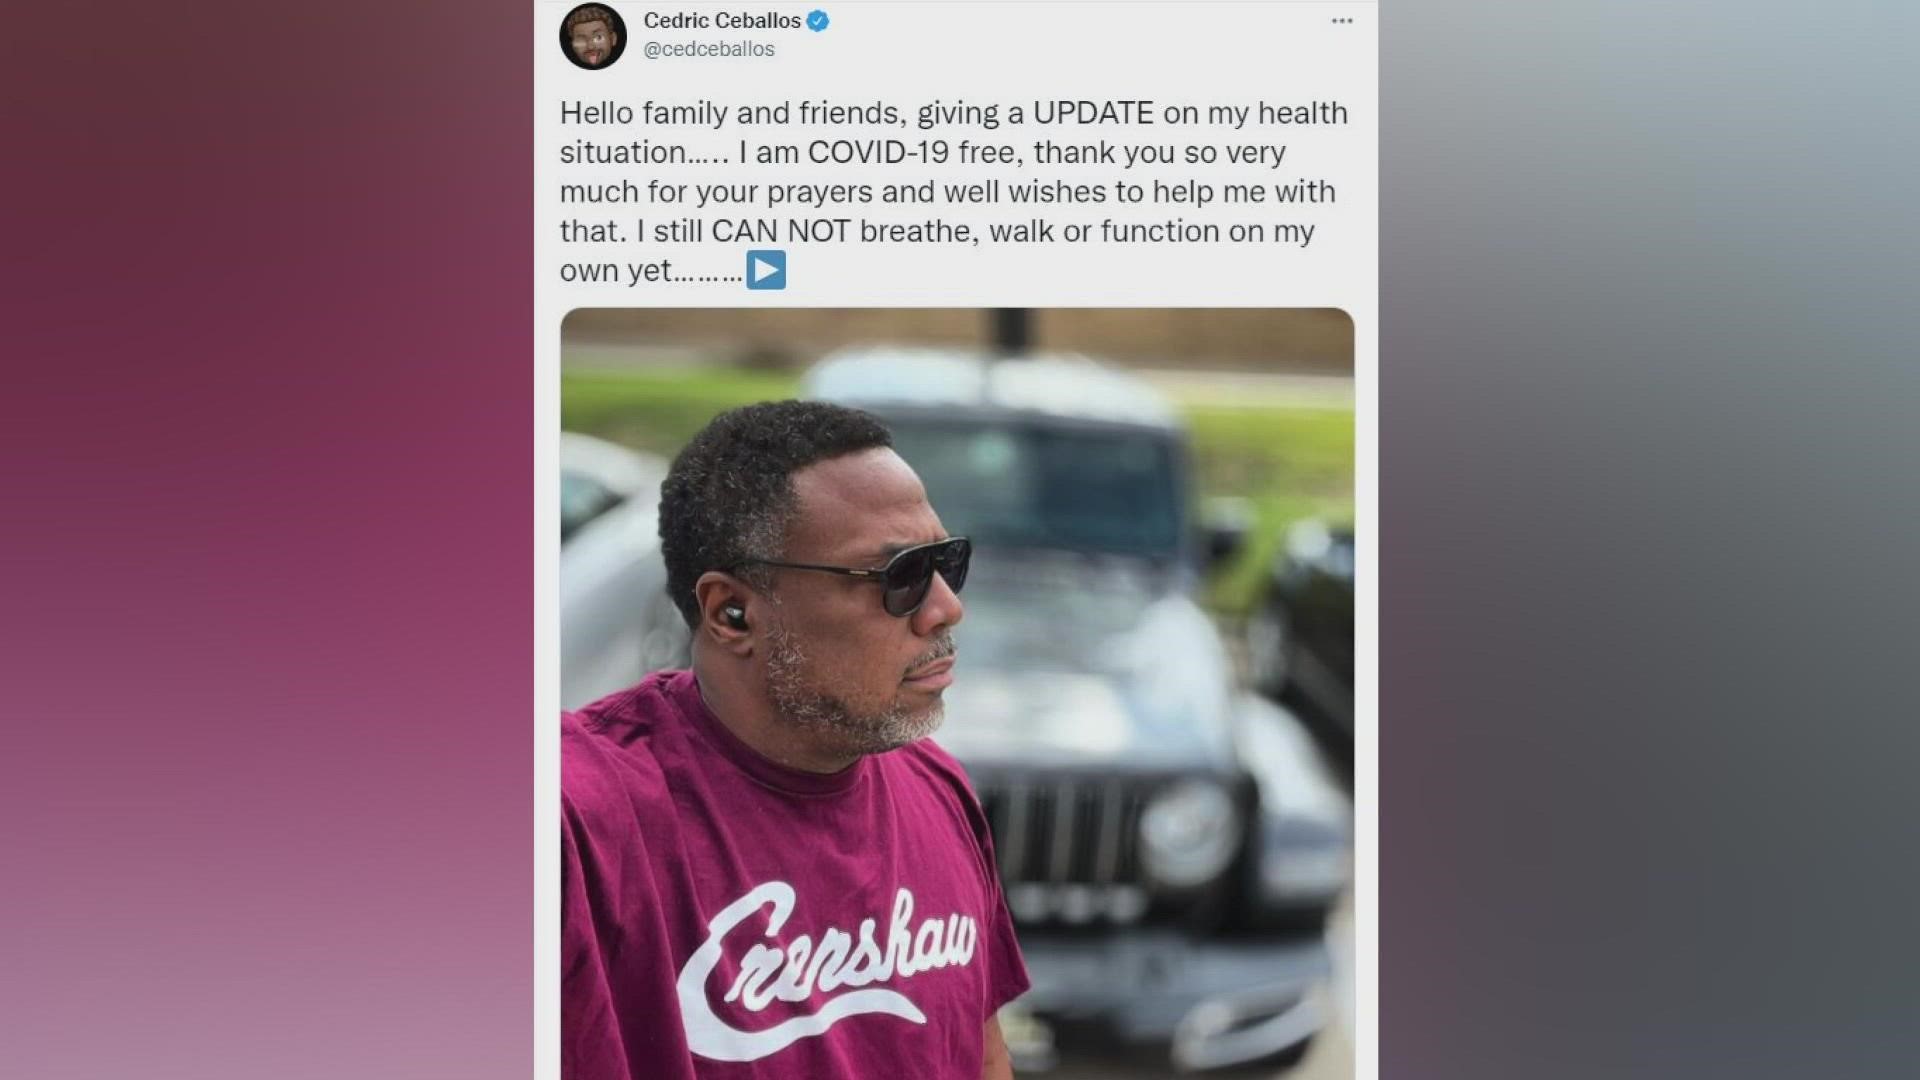 "I still CAN NOT breathe, walk or function on my own yet," Cedric Ceballos said in a tweet on Monday.